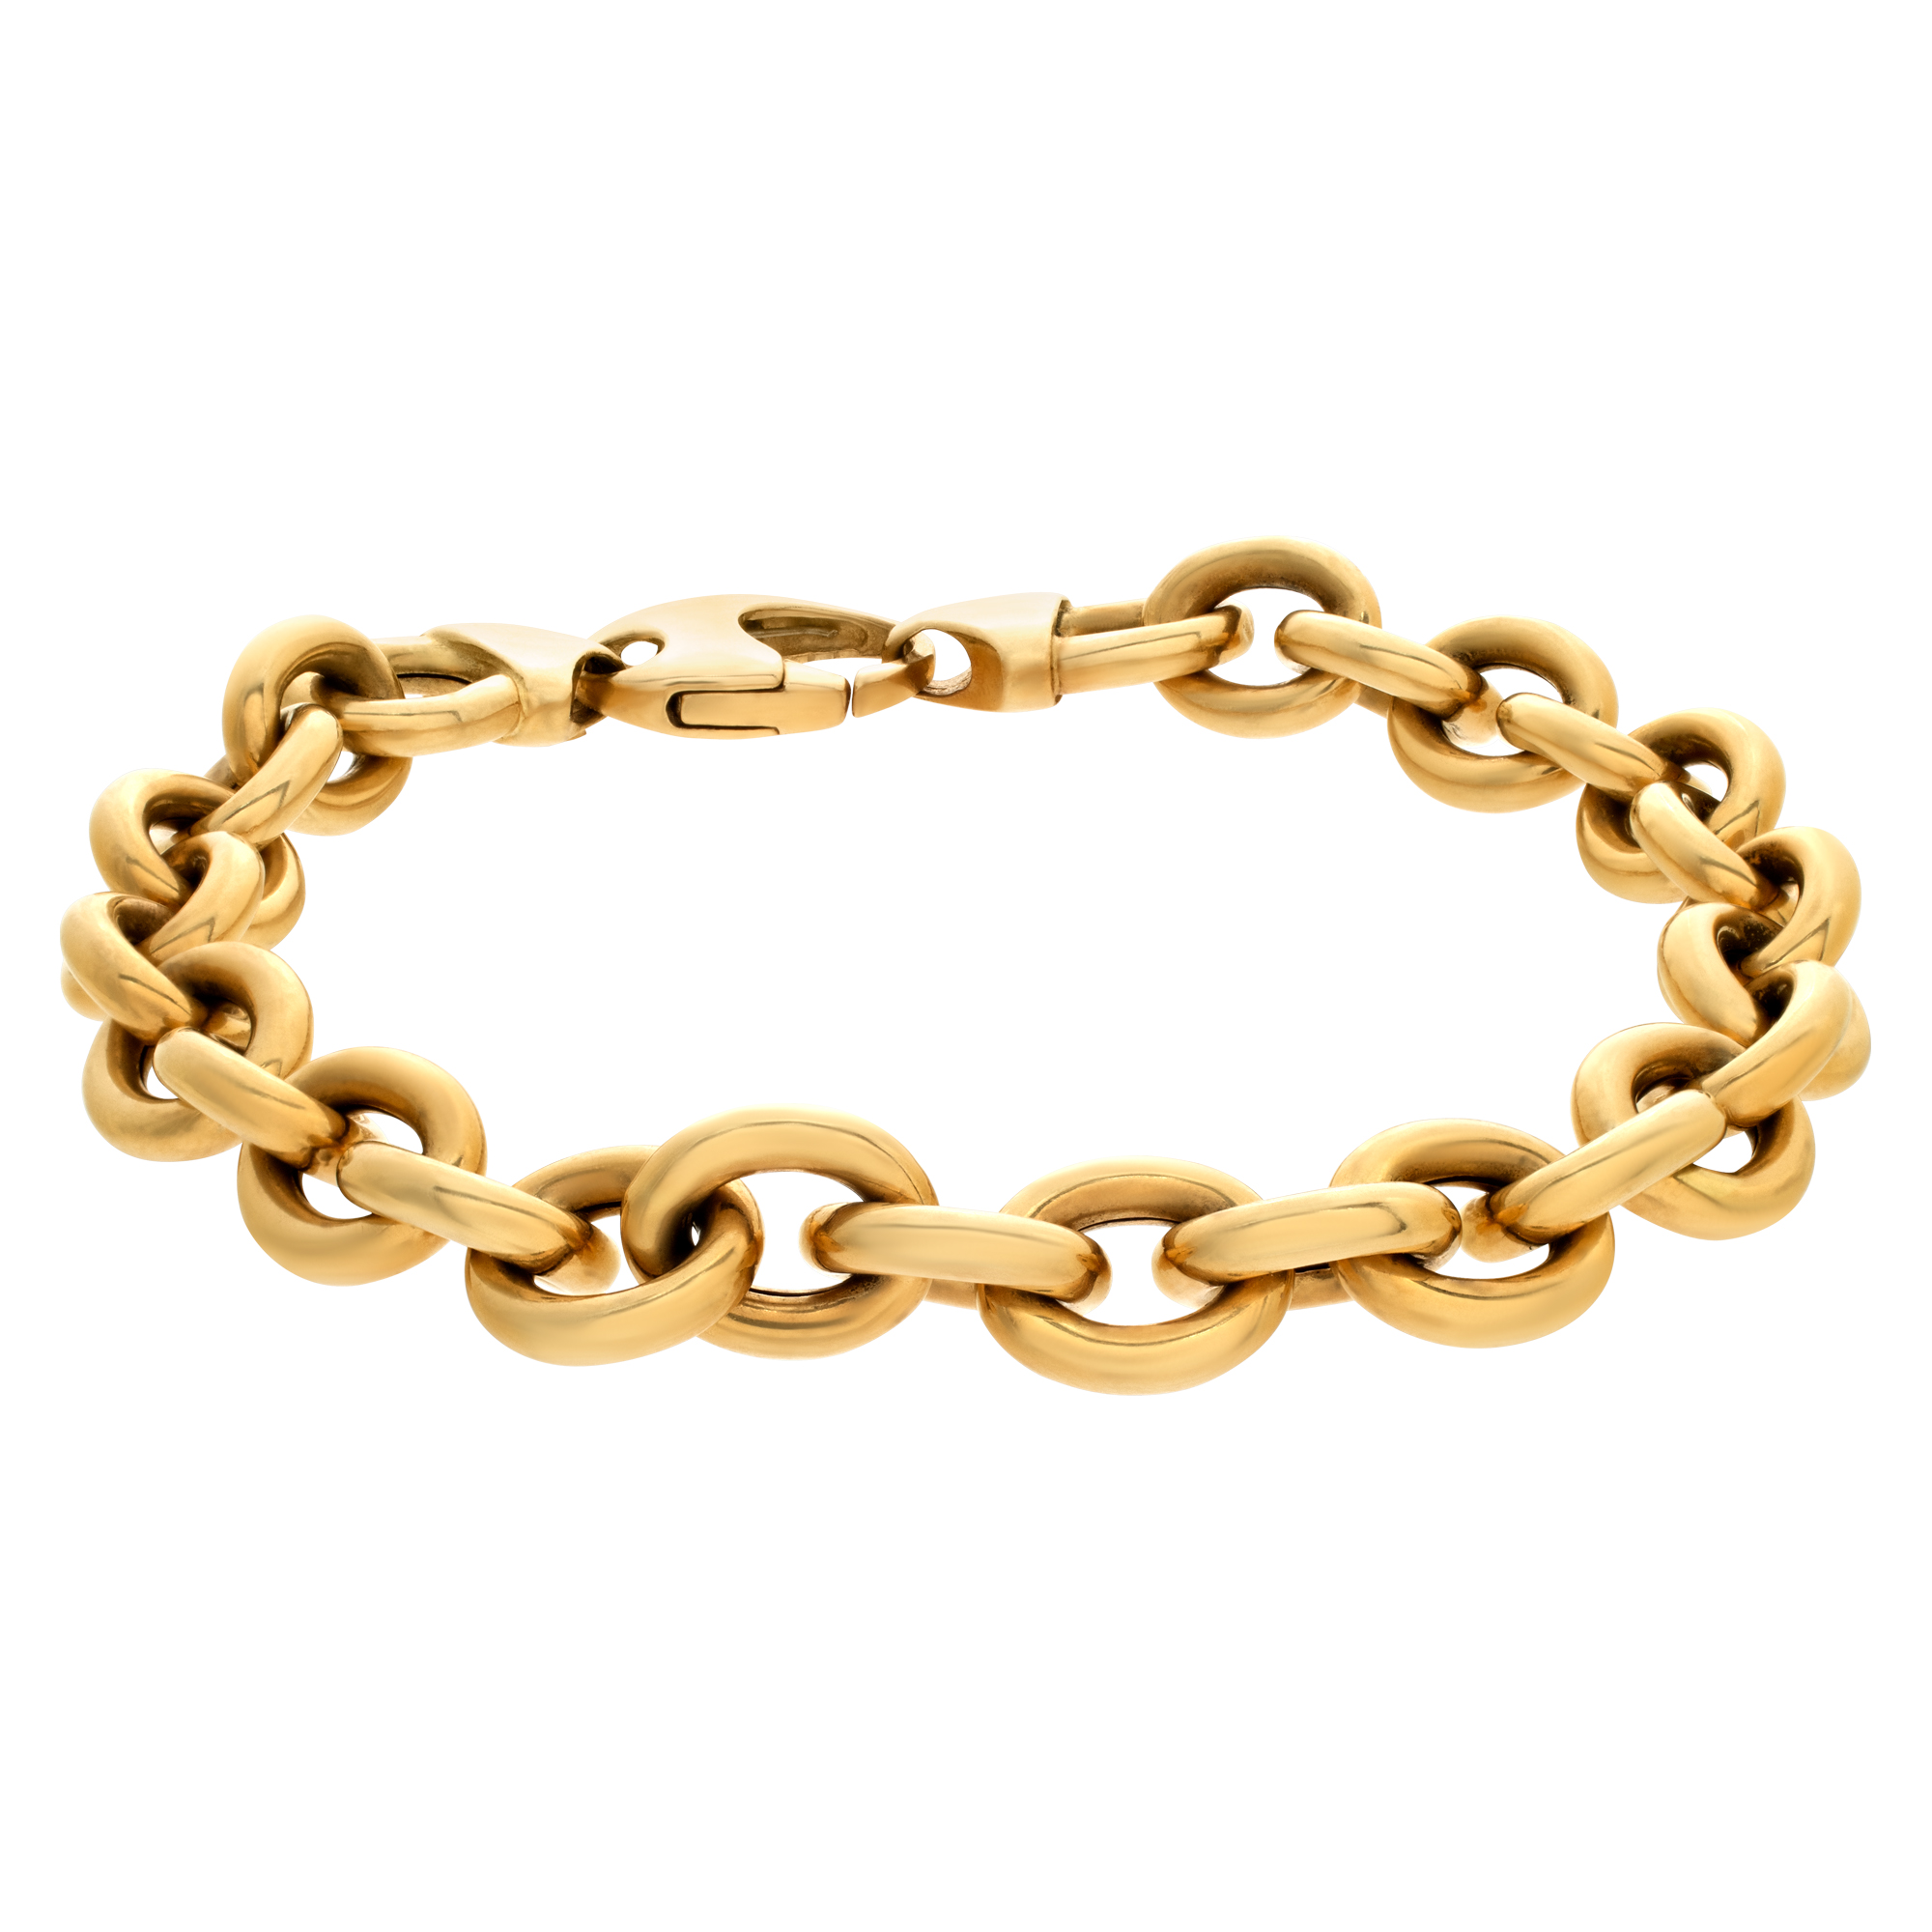 Oval link chain bracelet in 18k yellow gold. Length 8'', width 9mm. image 1